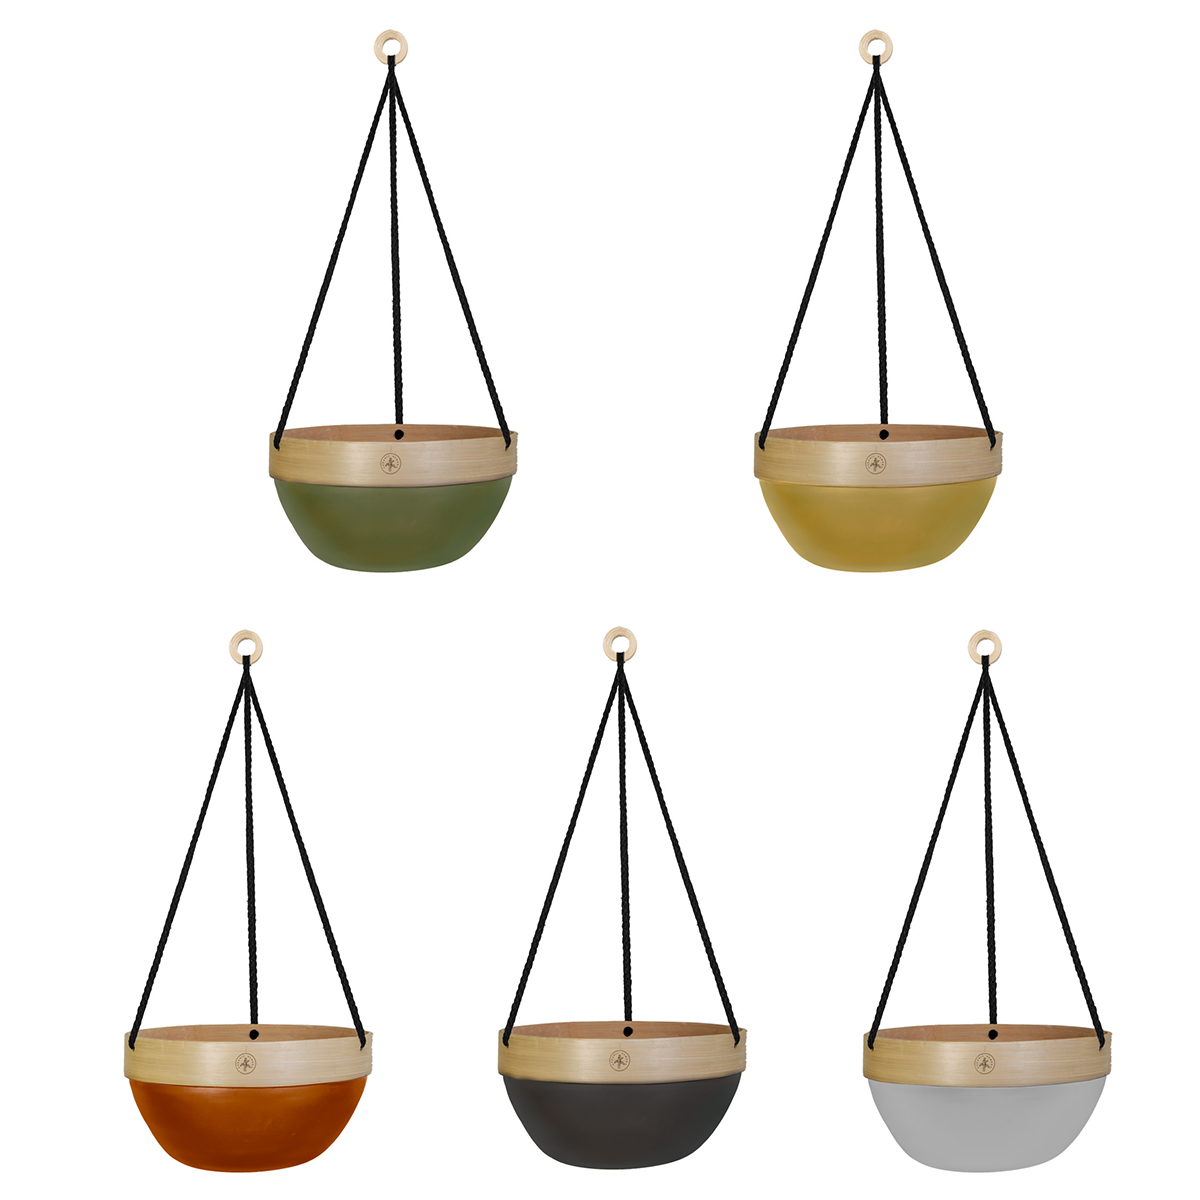 Picture of 12" Nordic Bamboo Hanging Bskt Asst colors